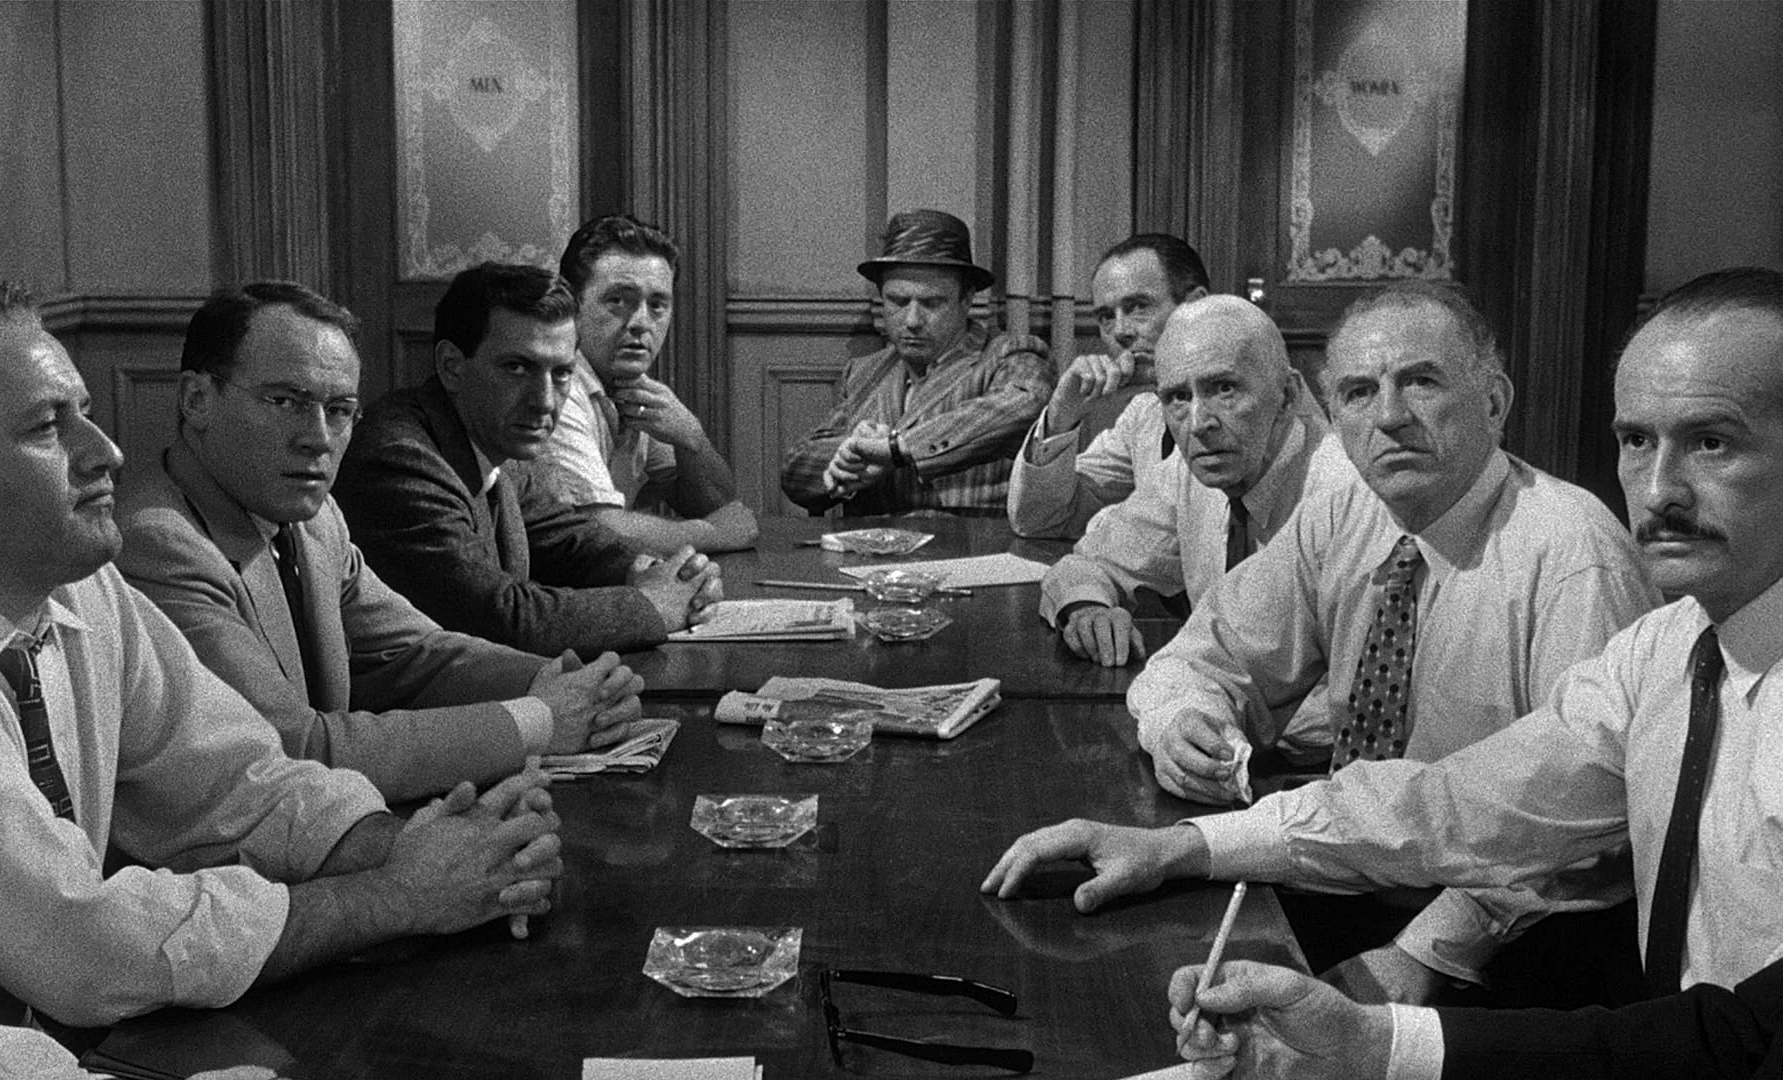 61. 12 Angry Men